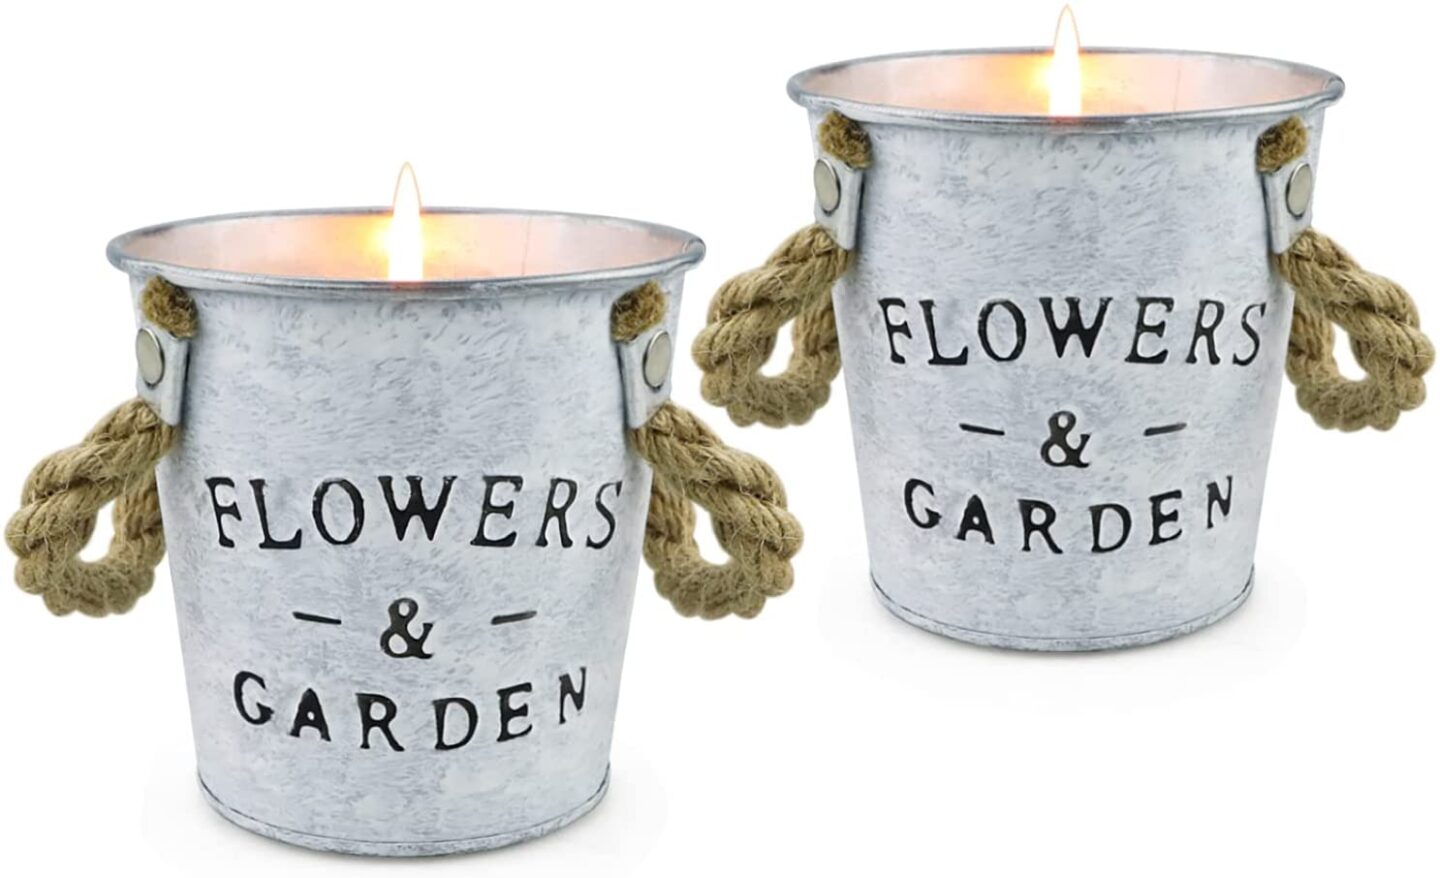 Outdoor citronella candles in farmhouse metal containers with "Flowers & Garden" on front.